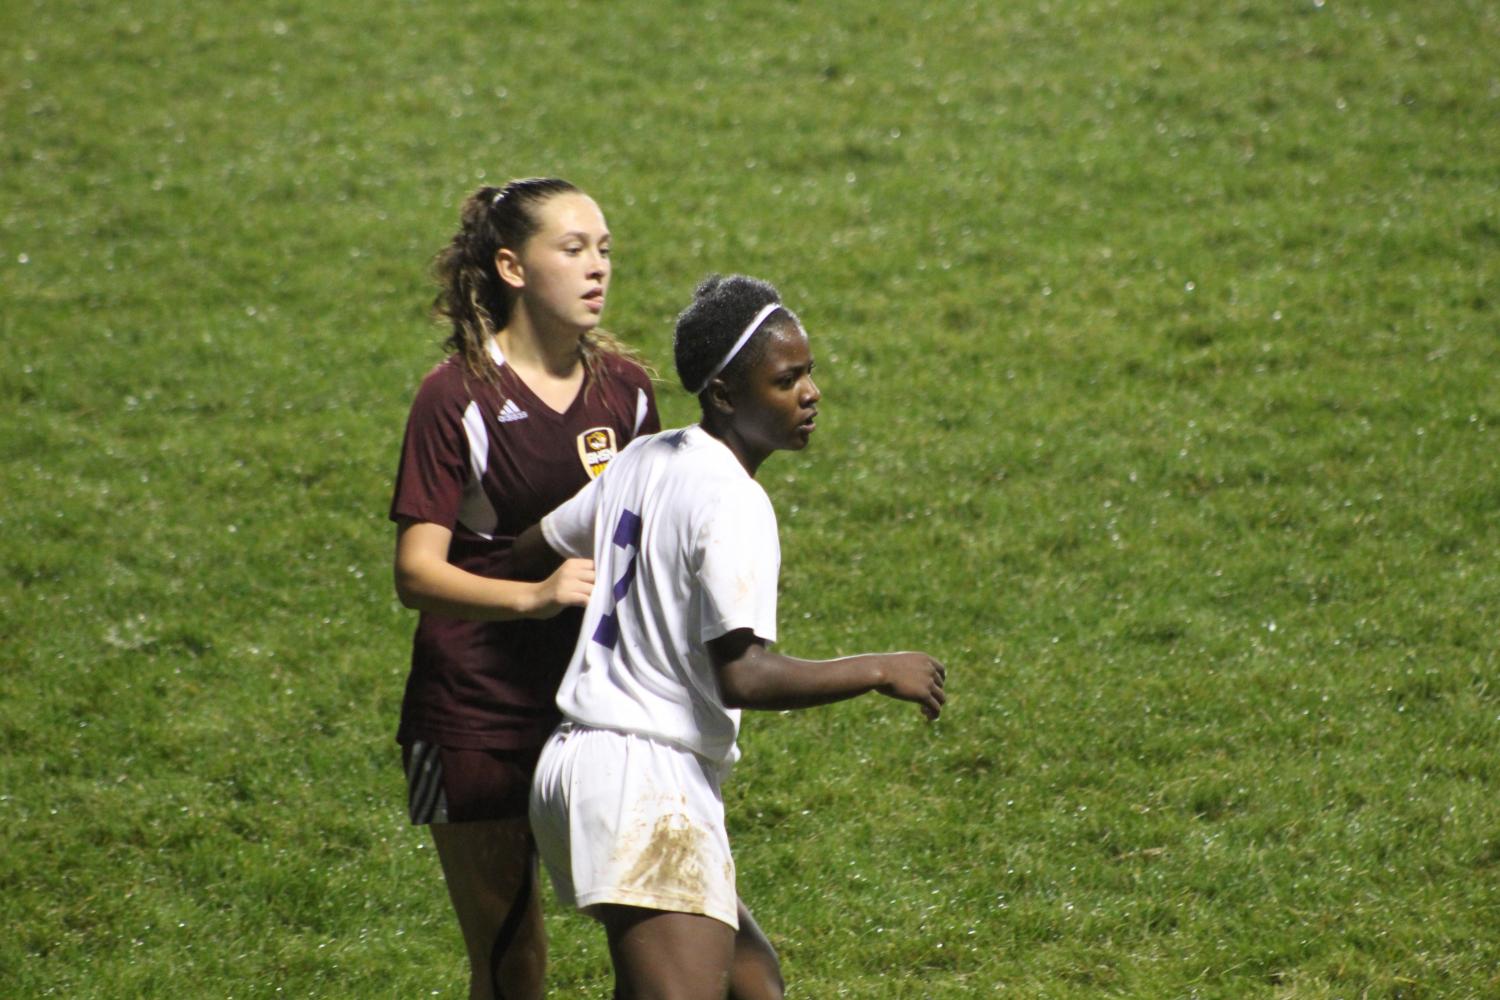 South soccer star strikes her way to HT Player of the Year